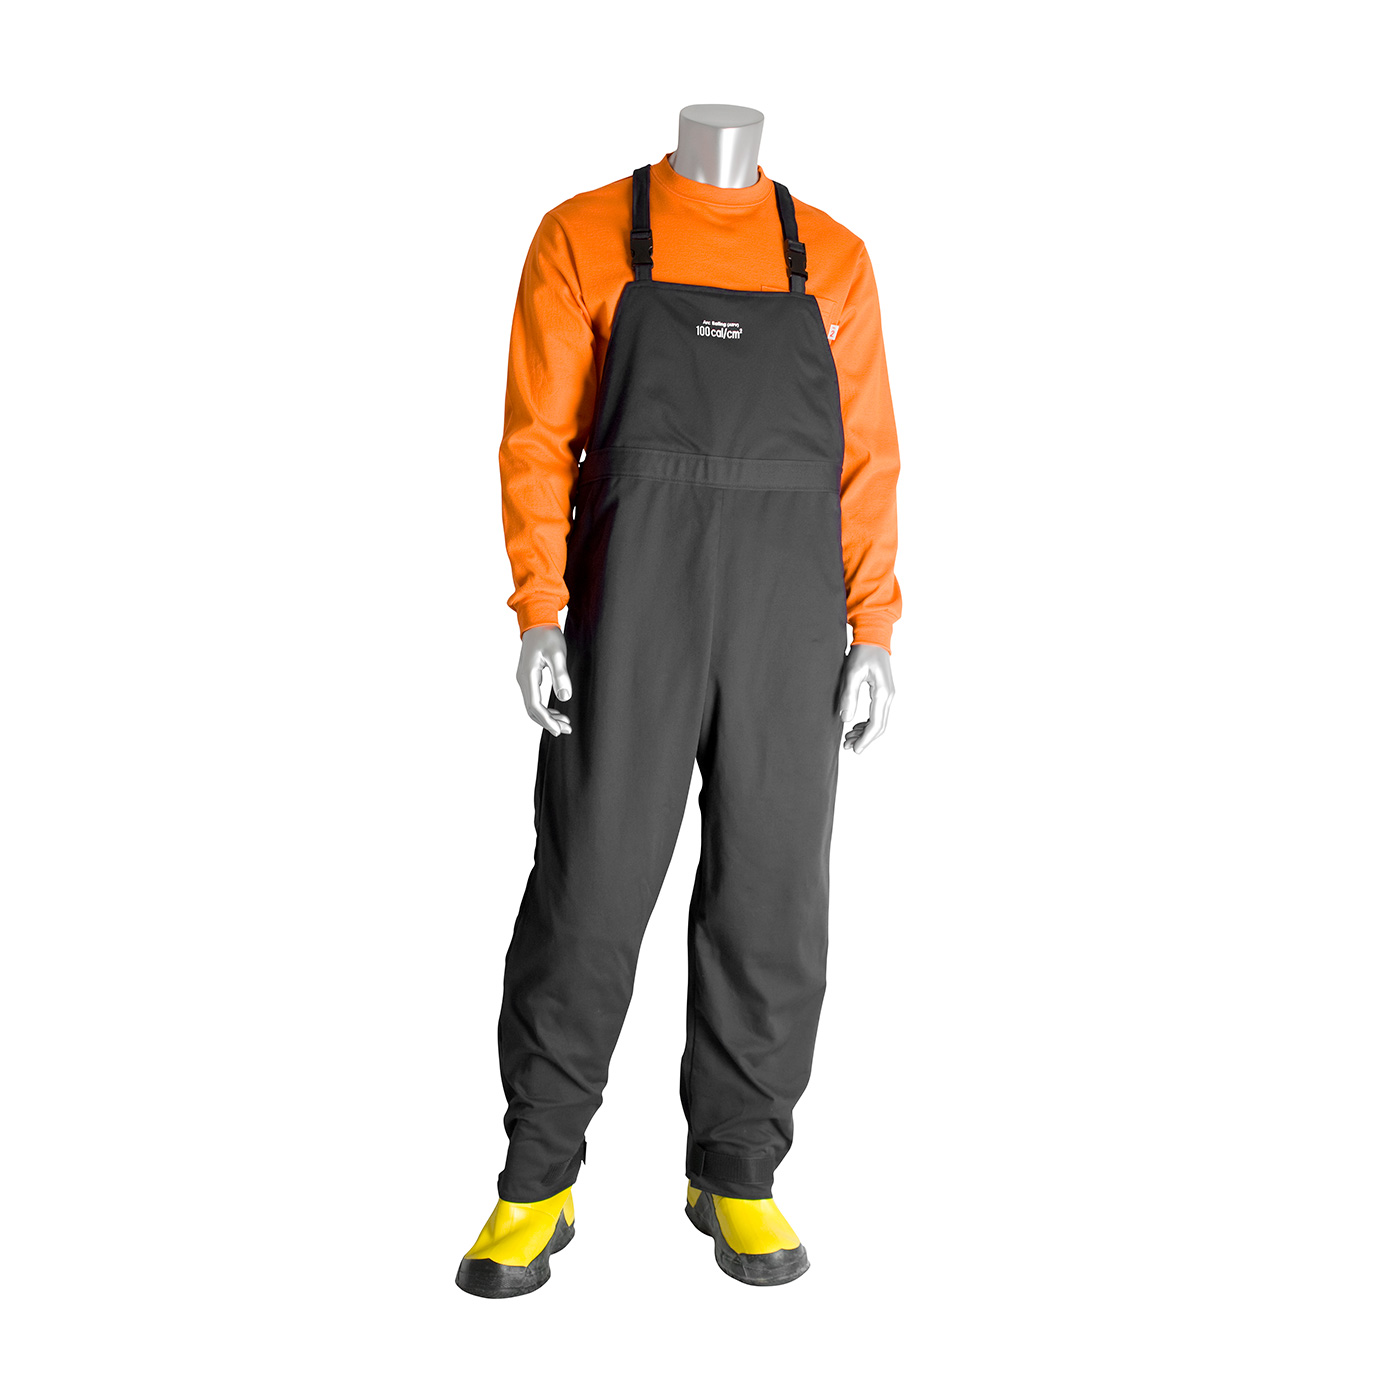 PIP® Gray 100 Cal/cm2 Arc & Fire Resistant Safety Overalls